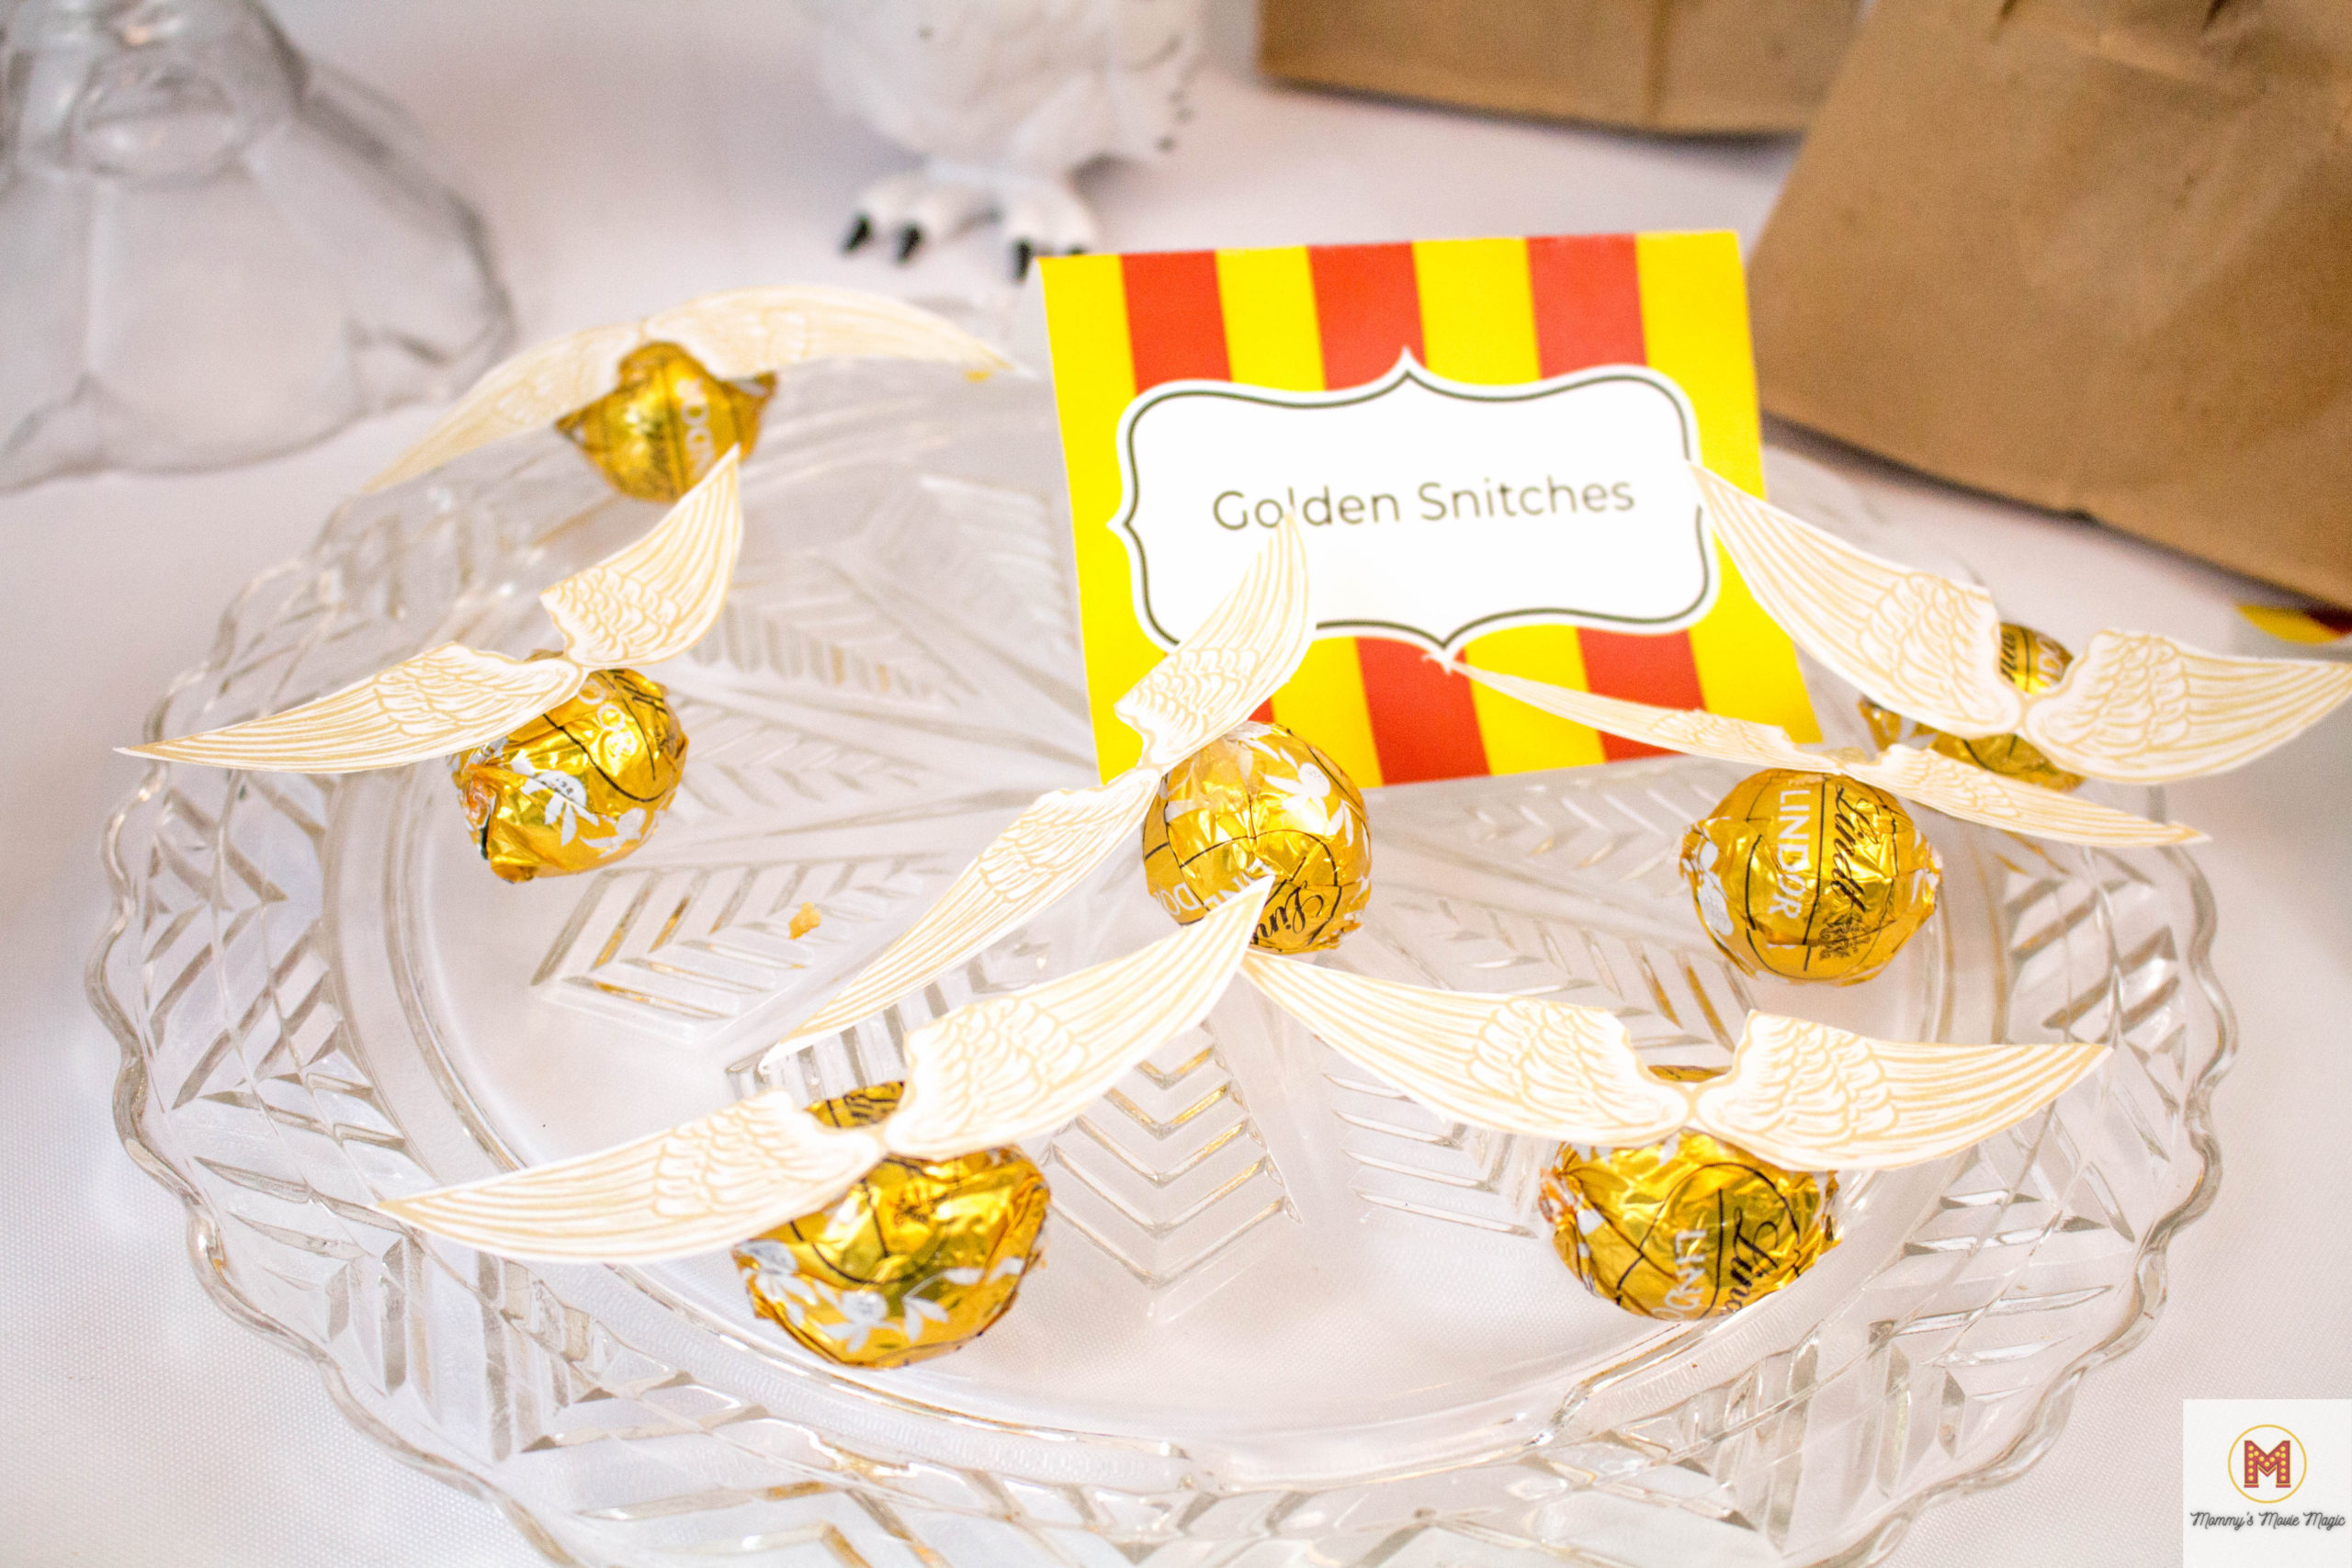 Harry Potter Party Favors - 5 Easy Treats Kids Will Love + Free Printables